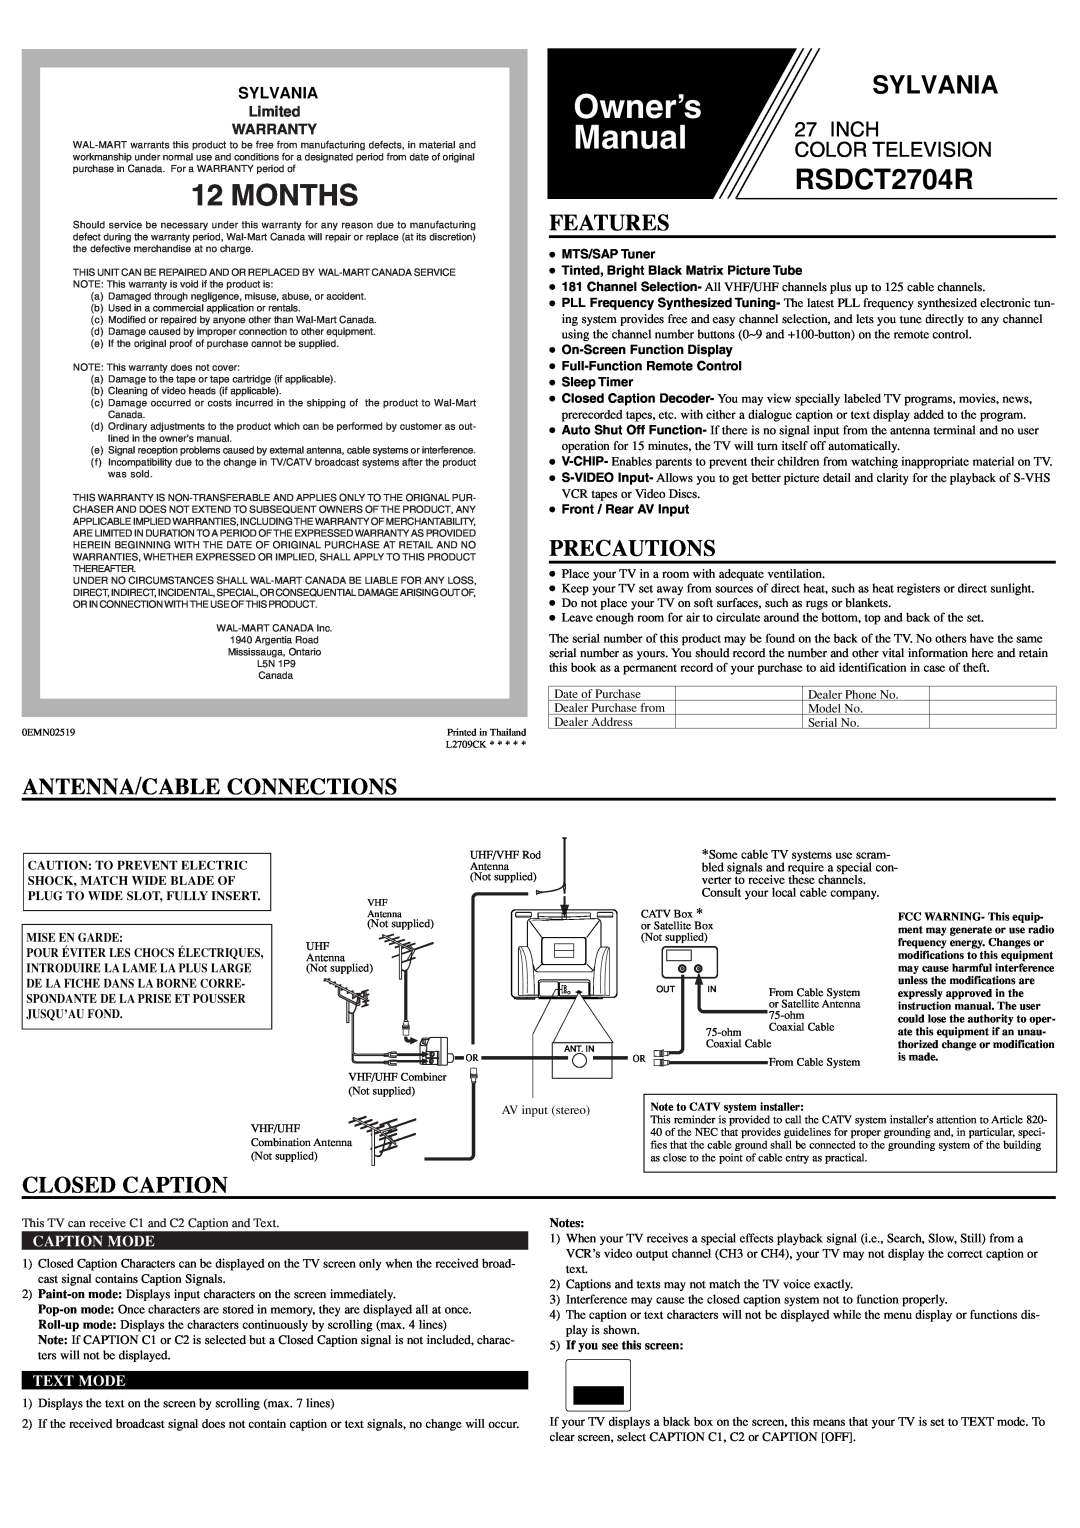 Sylvania RSDCT2704R owner manual Features, Precautions, Antenna/Cable Connections, Closed Caption, Caption Mode, Text Mode 